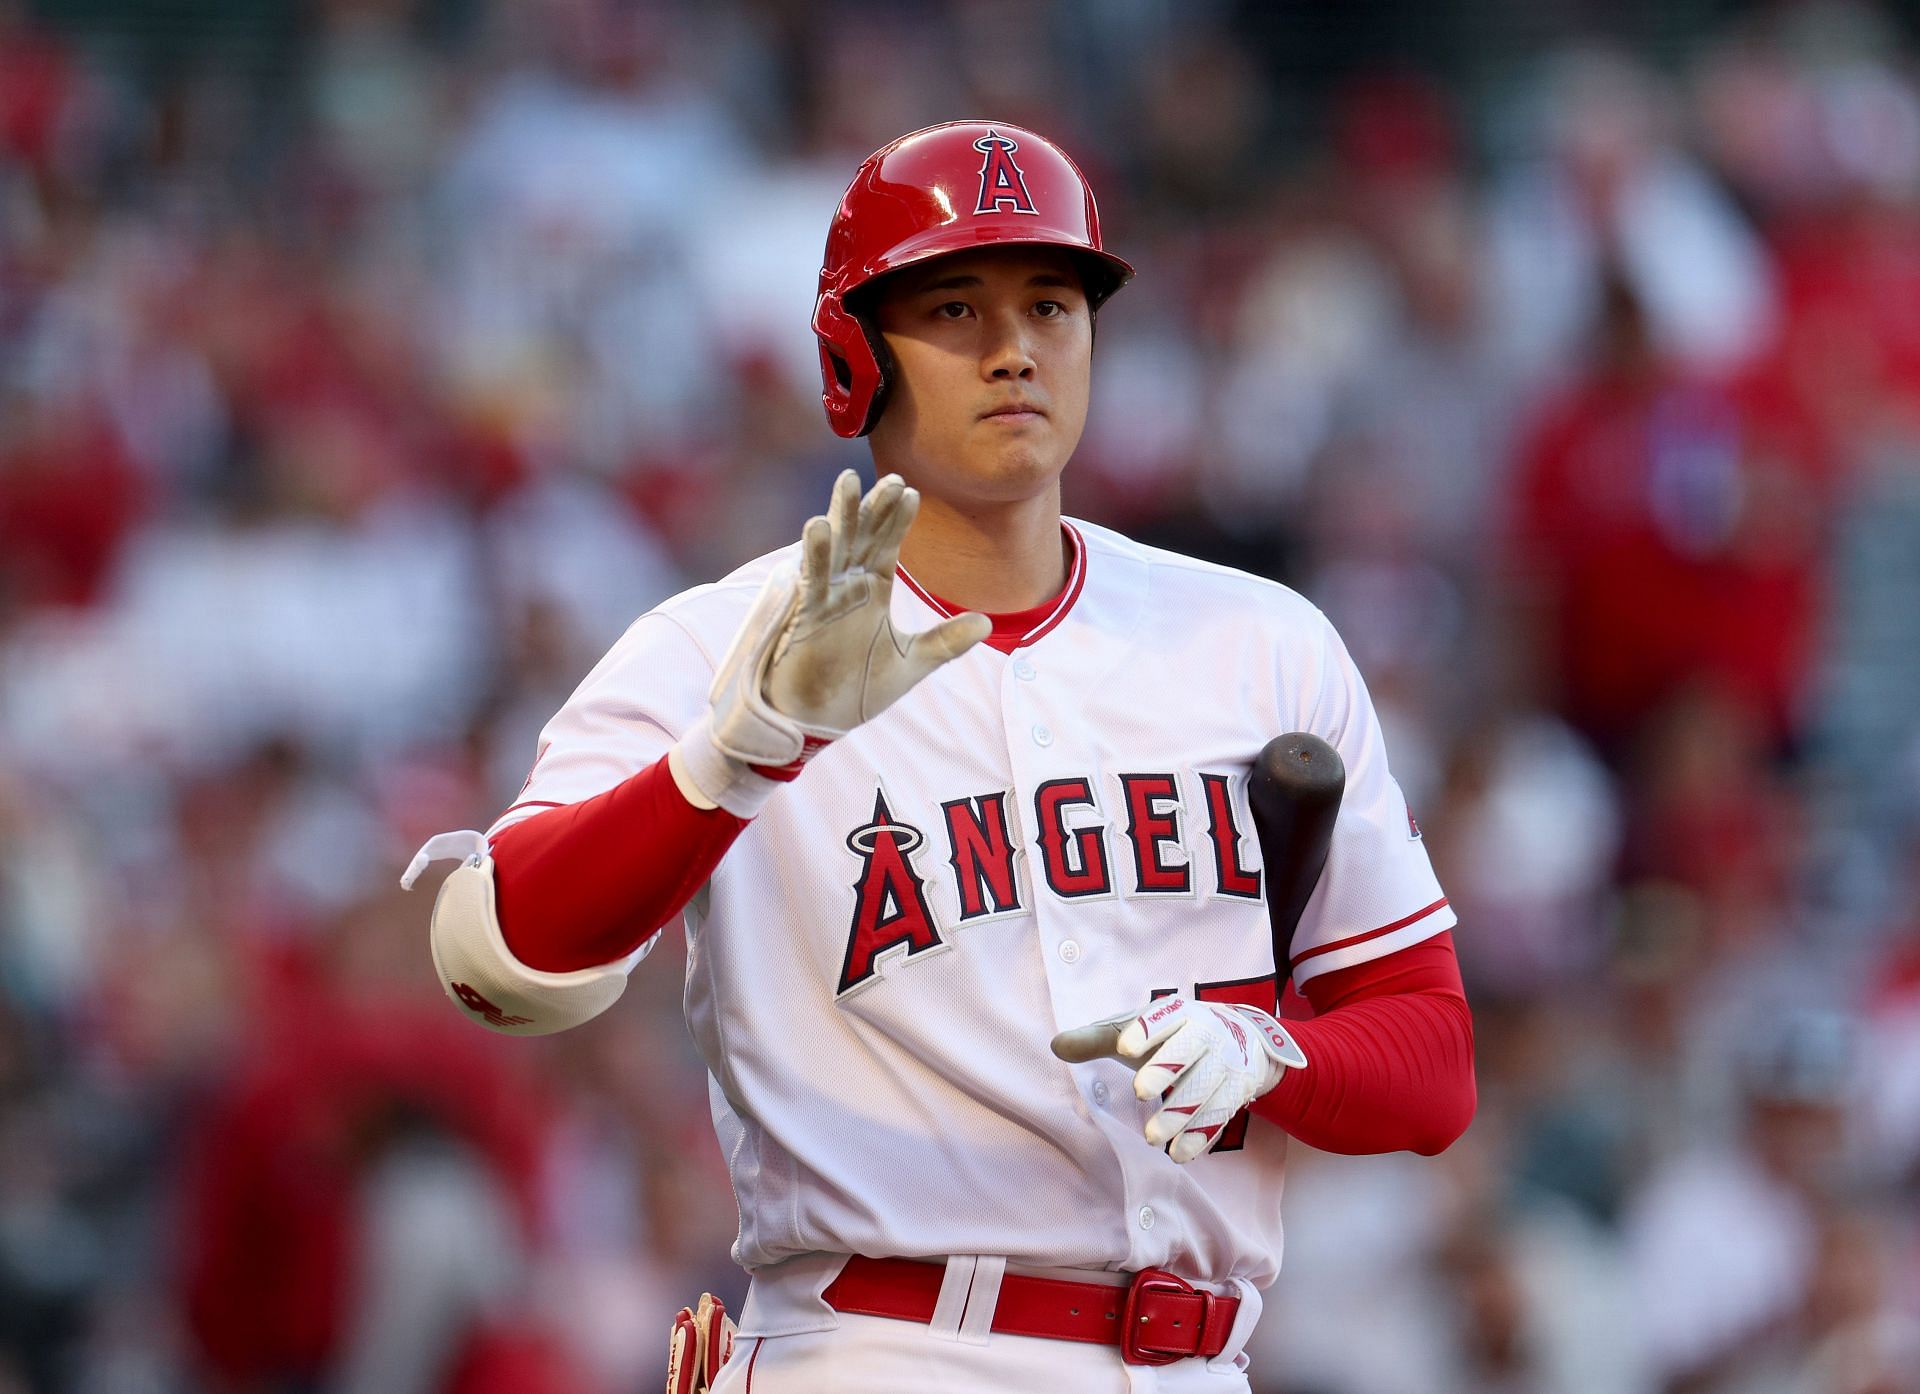 Shohei Ohtani of the Los Angeles Angels prepares to bat against the Chicago White Sox win at Angel Stadium of Anaheim